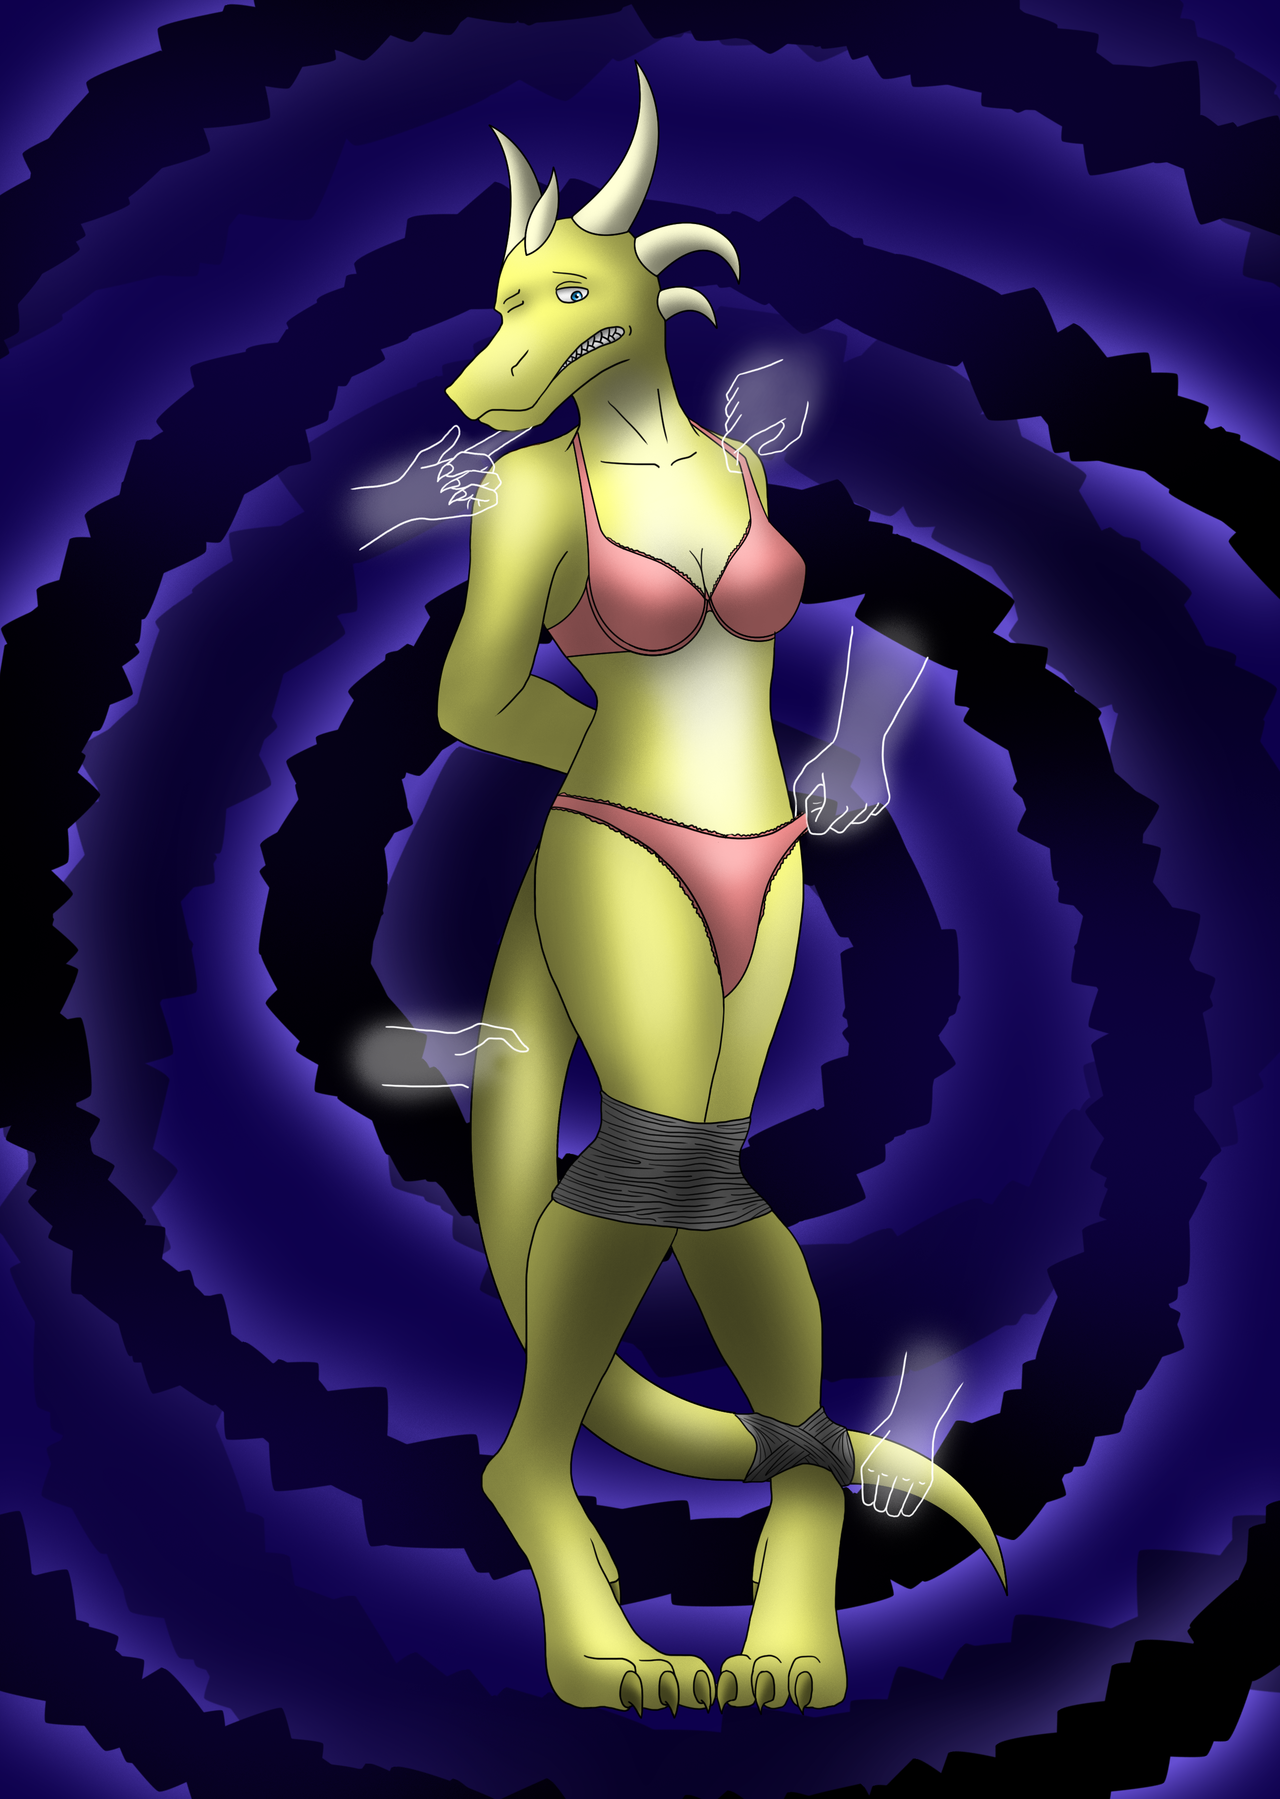 Inspired by Raphael’s series of pervy ghosts, this here is that of a dragoness;